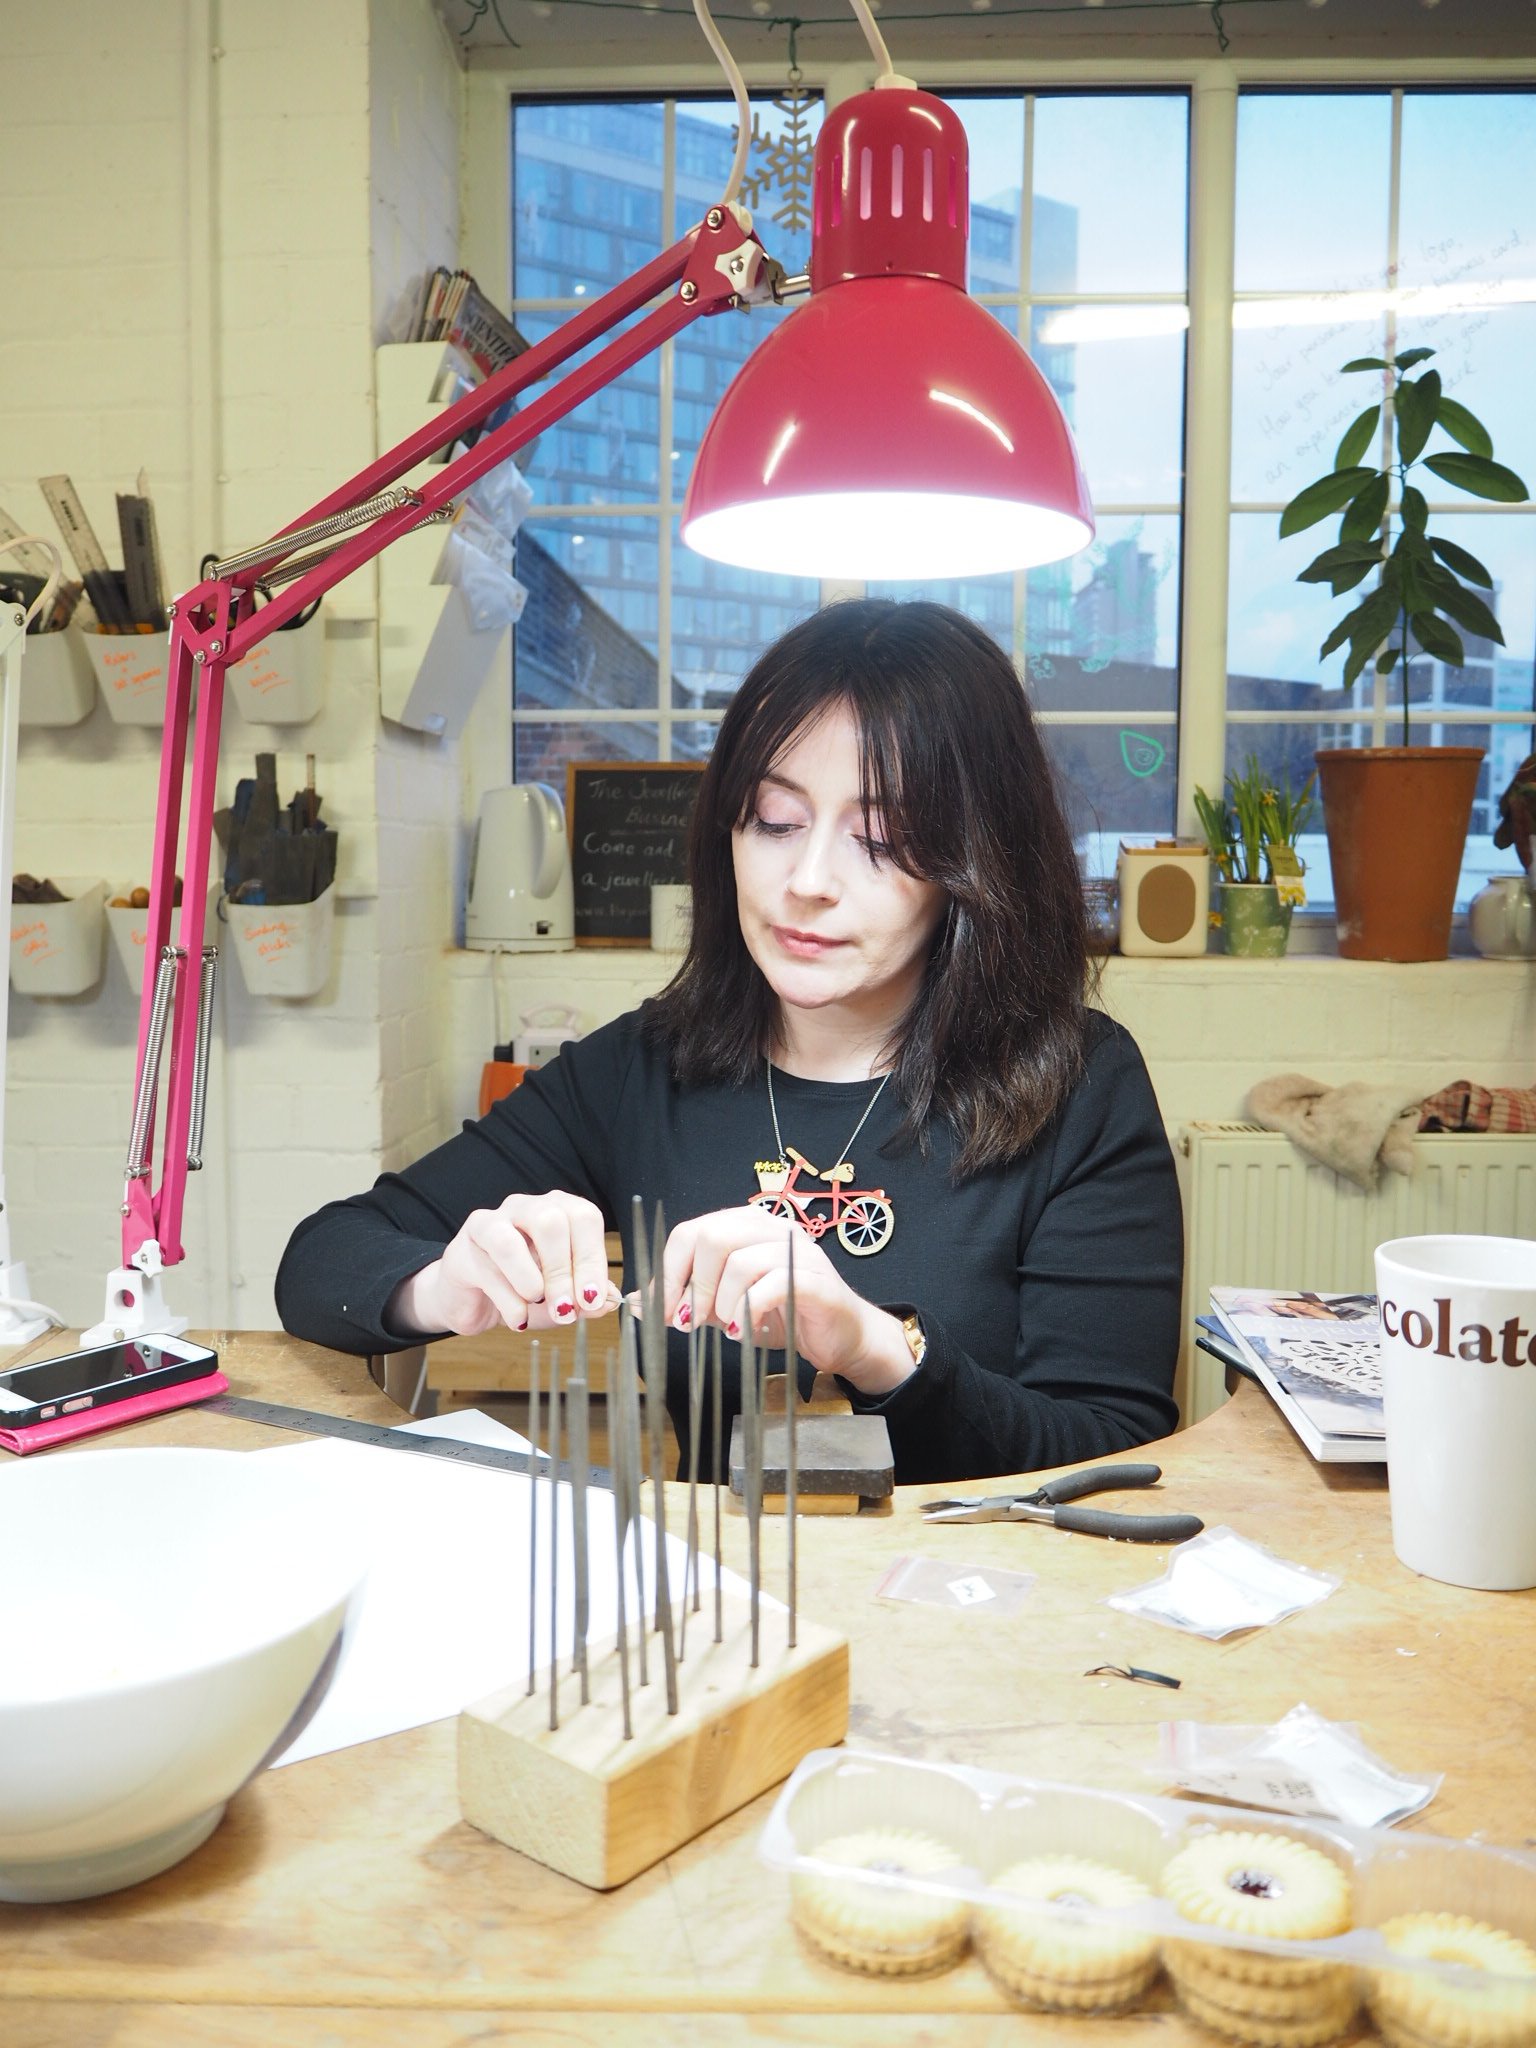 Jewellery Making Classes - Flexible 6 Class Pass (12 hrs total).